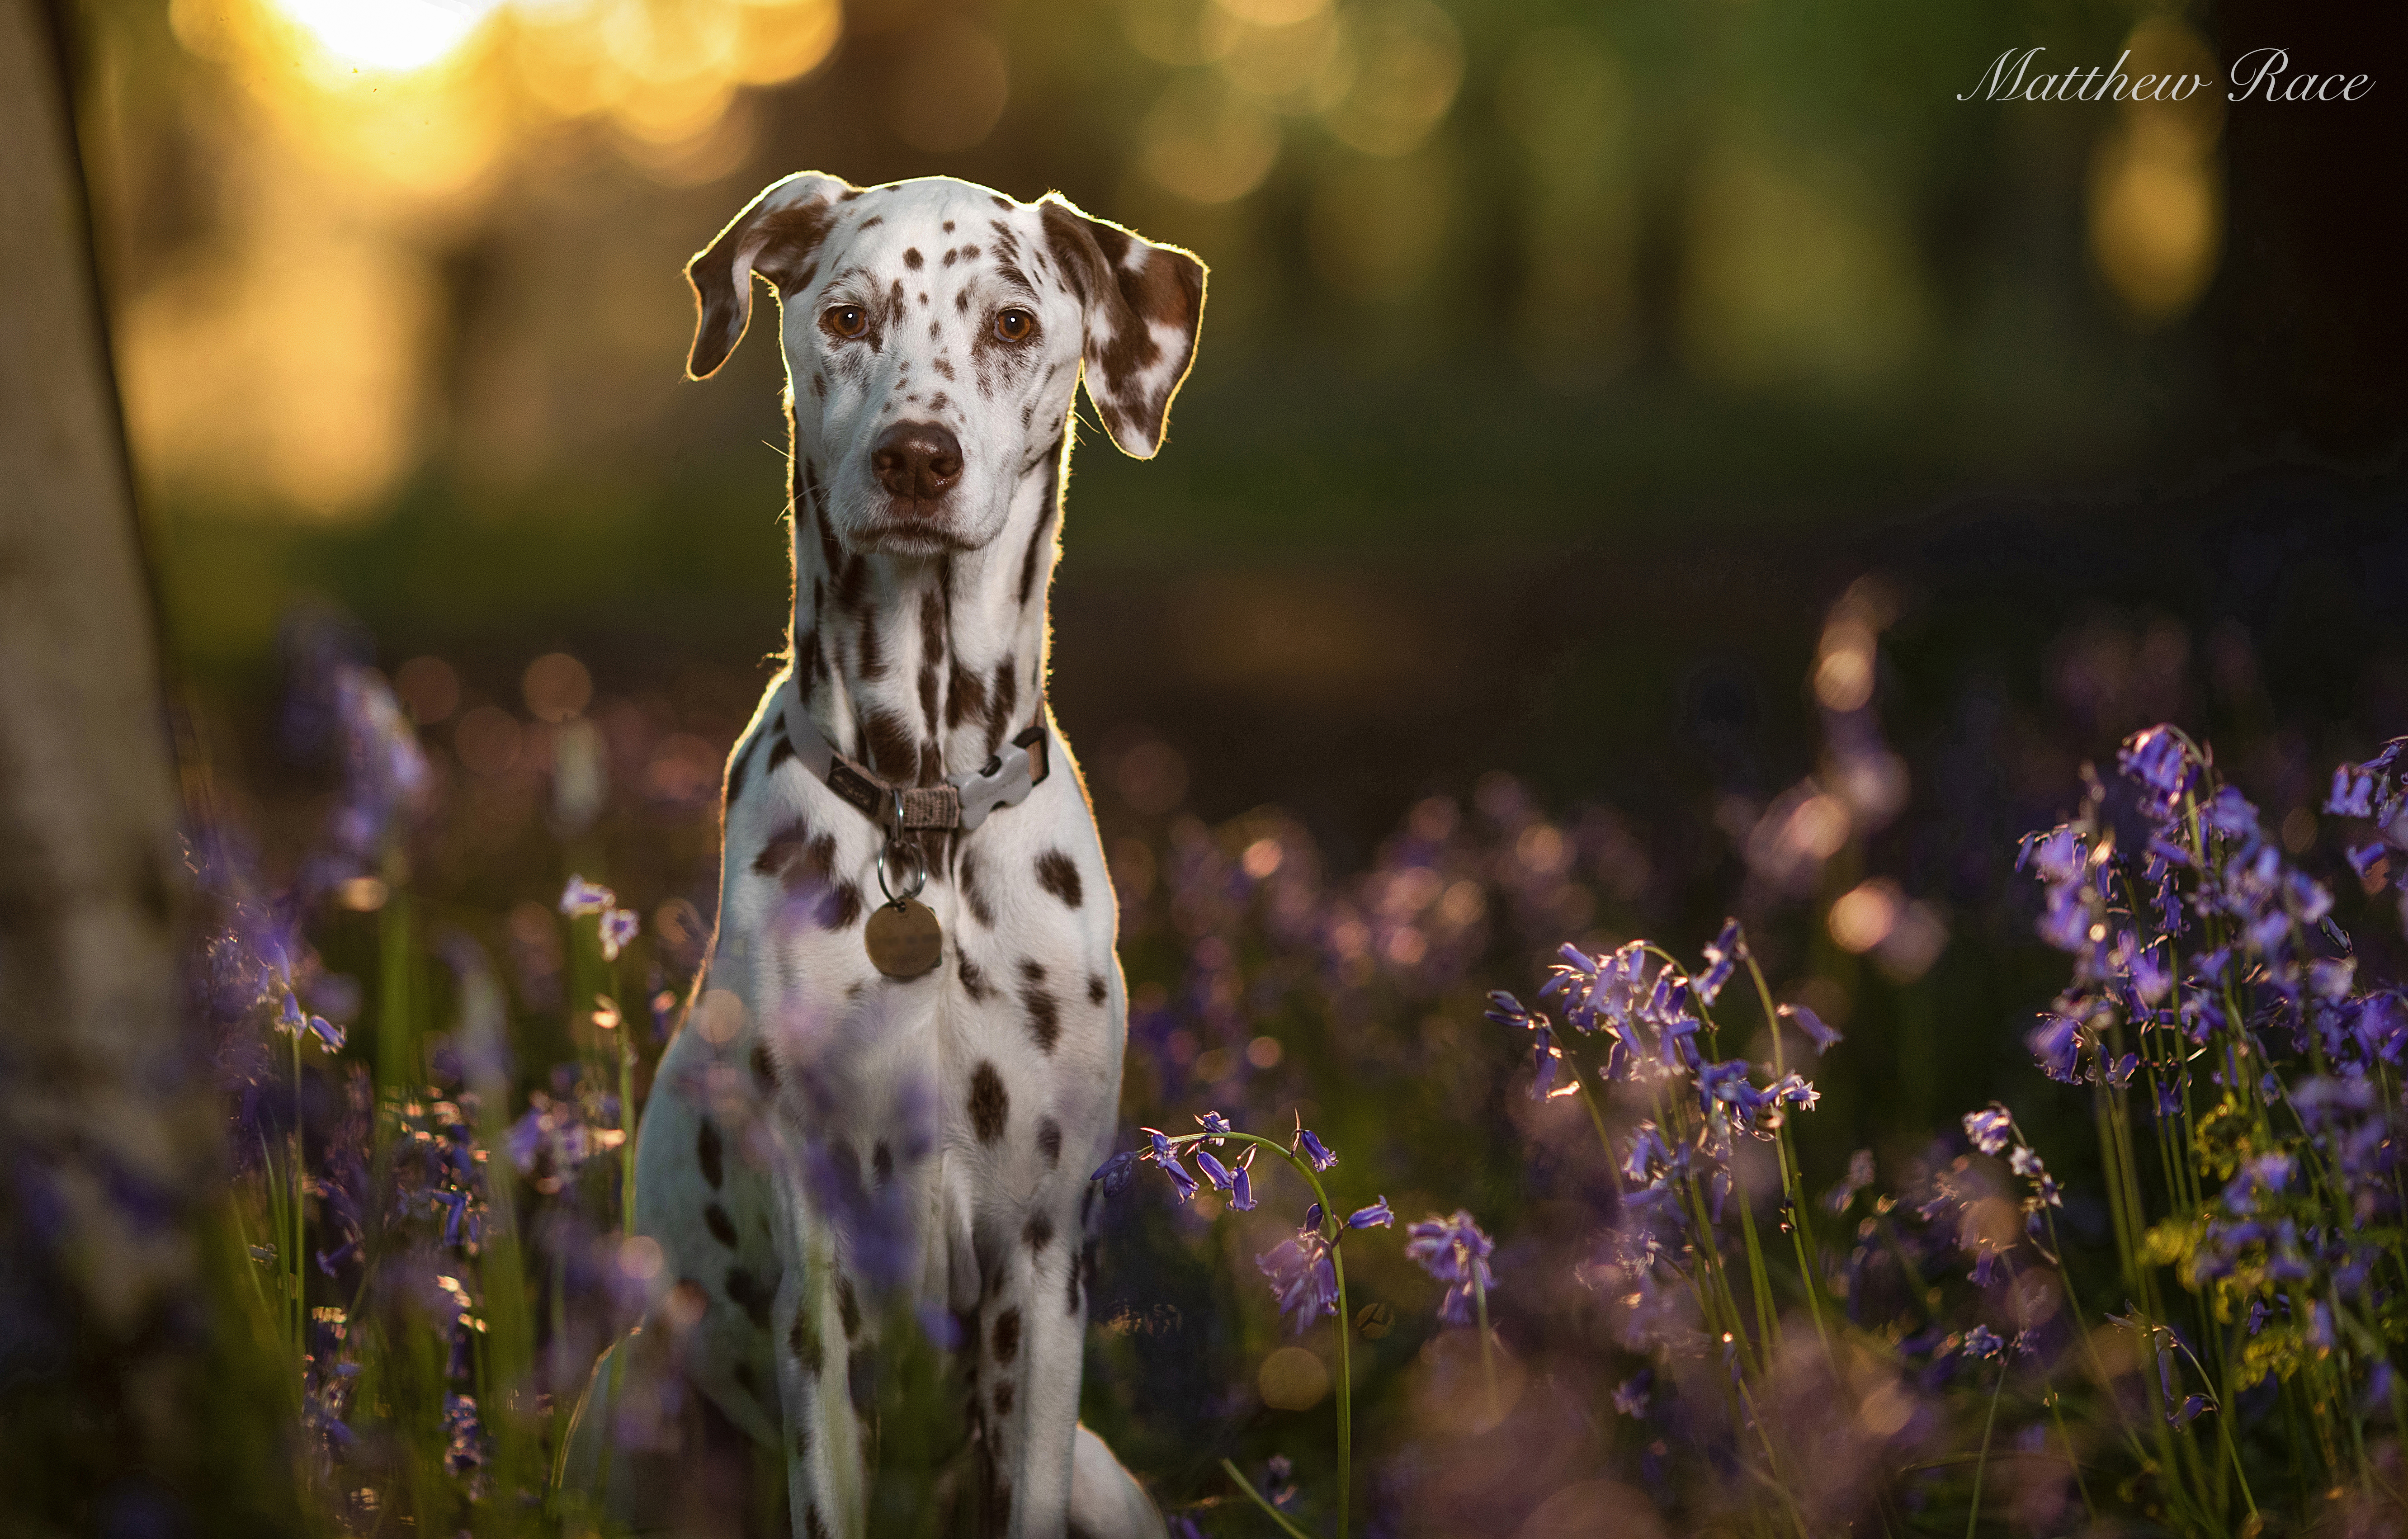 Dalmatian in bluebells at golden hour